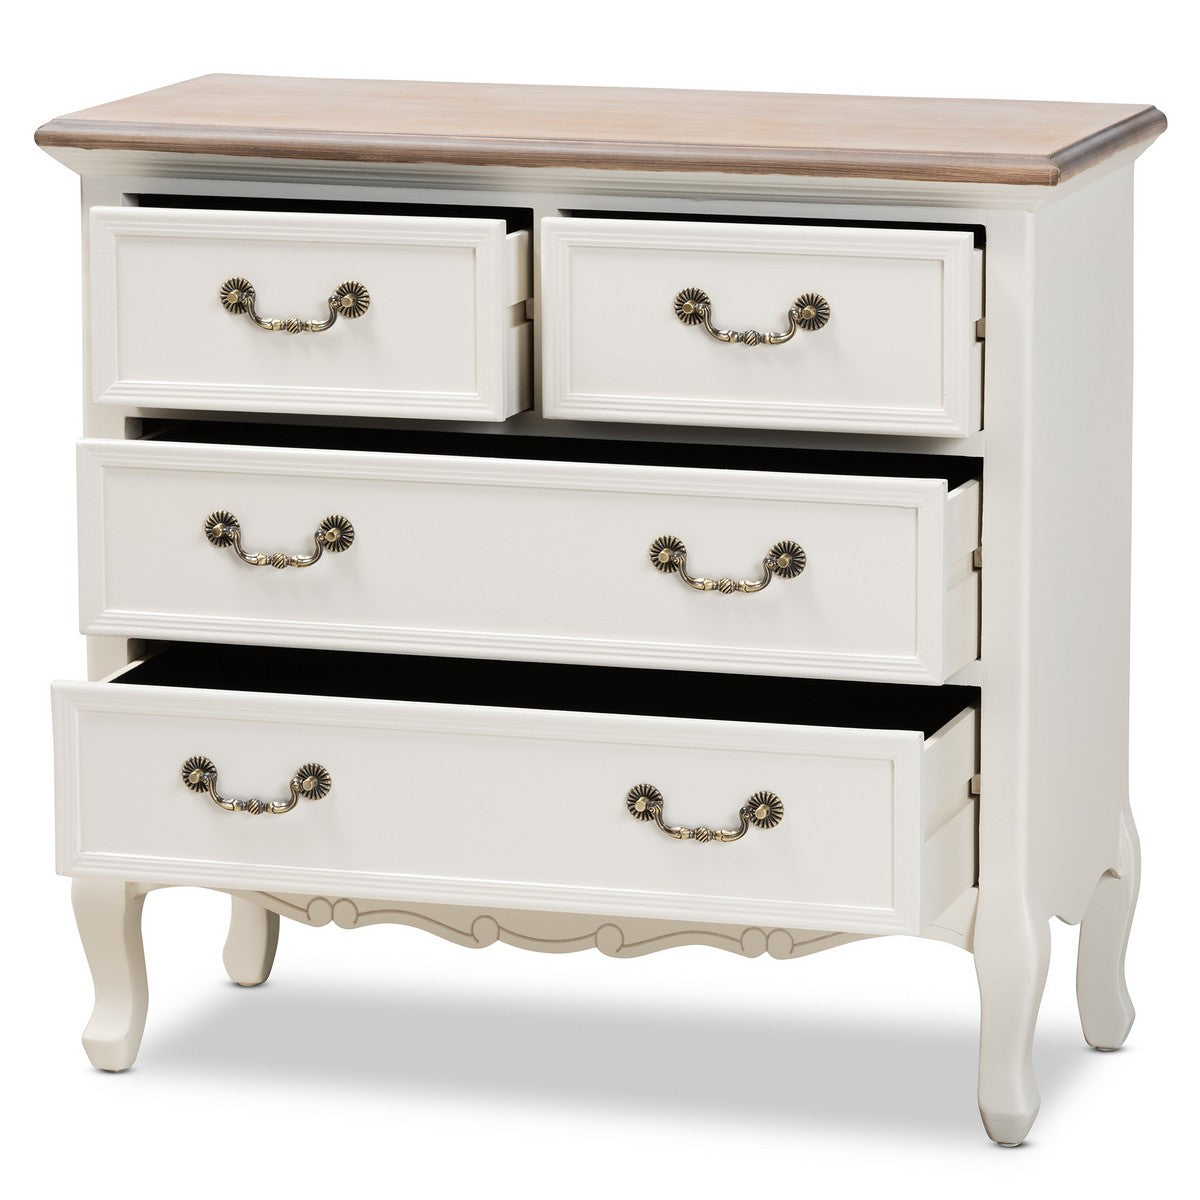 Baxton Studio Amalie Antique French Country Cottage Two-Tone White and Oak Finished 4-Drawer Accent Dresser